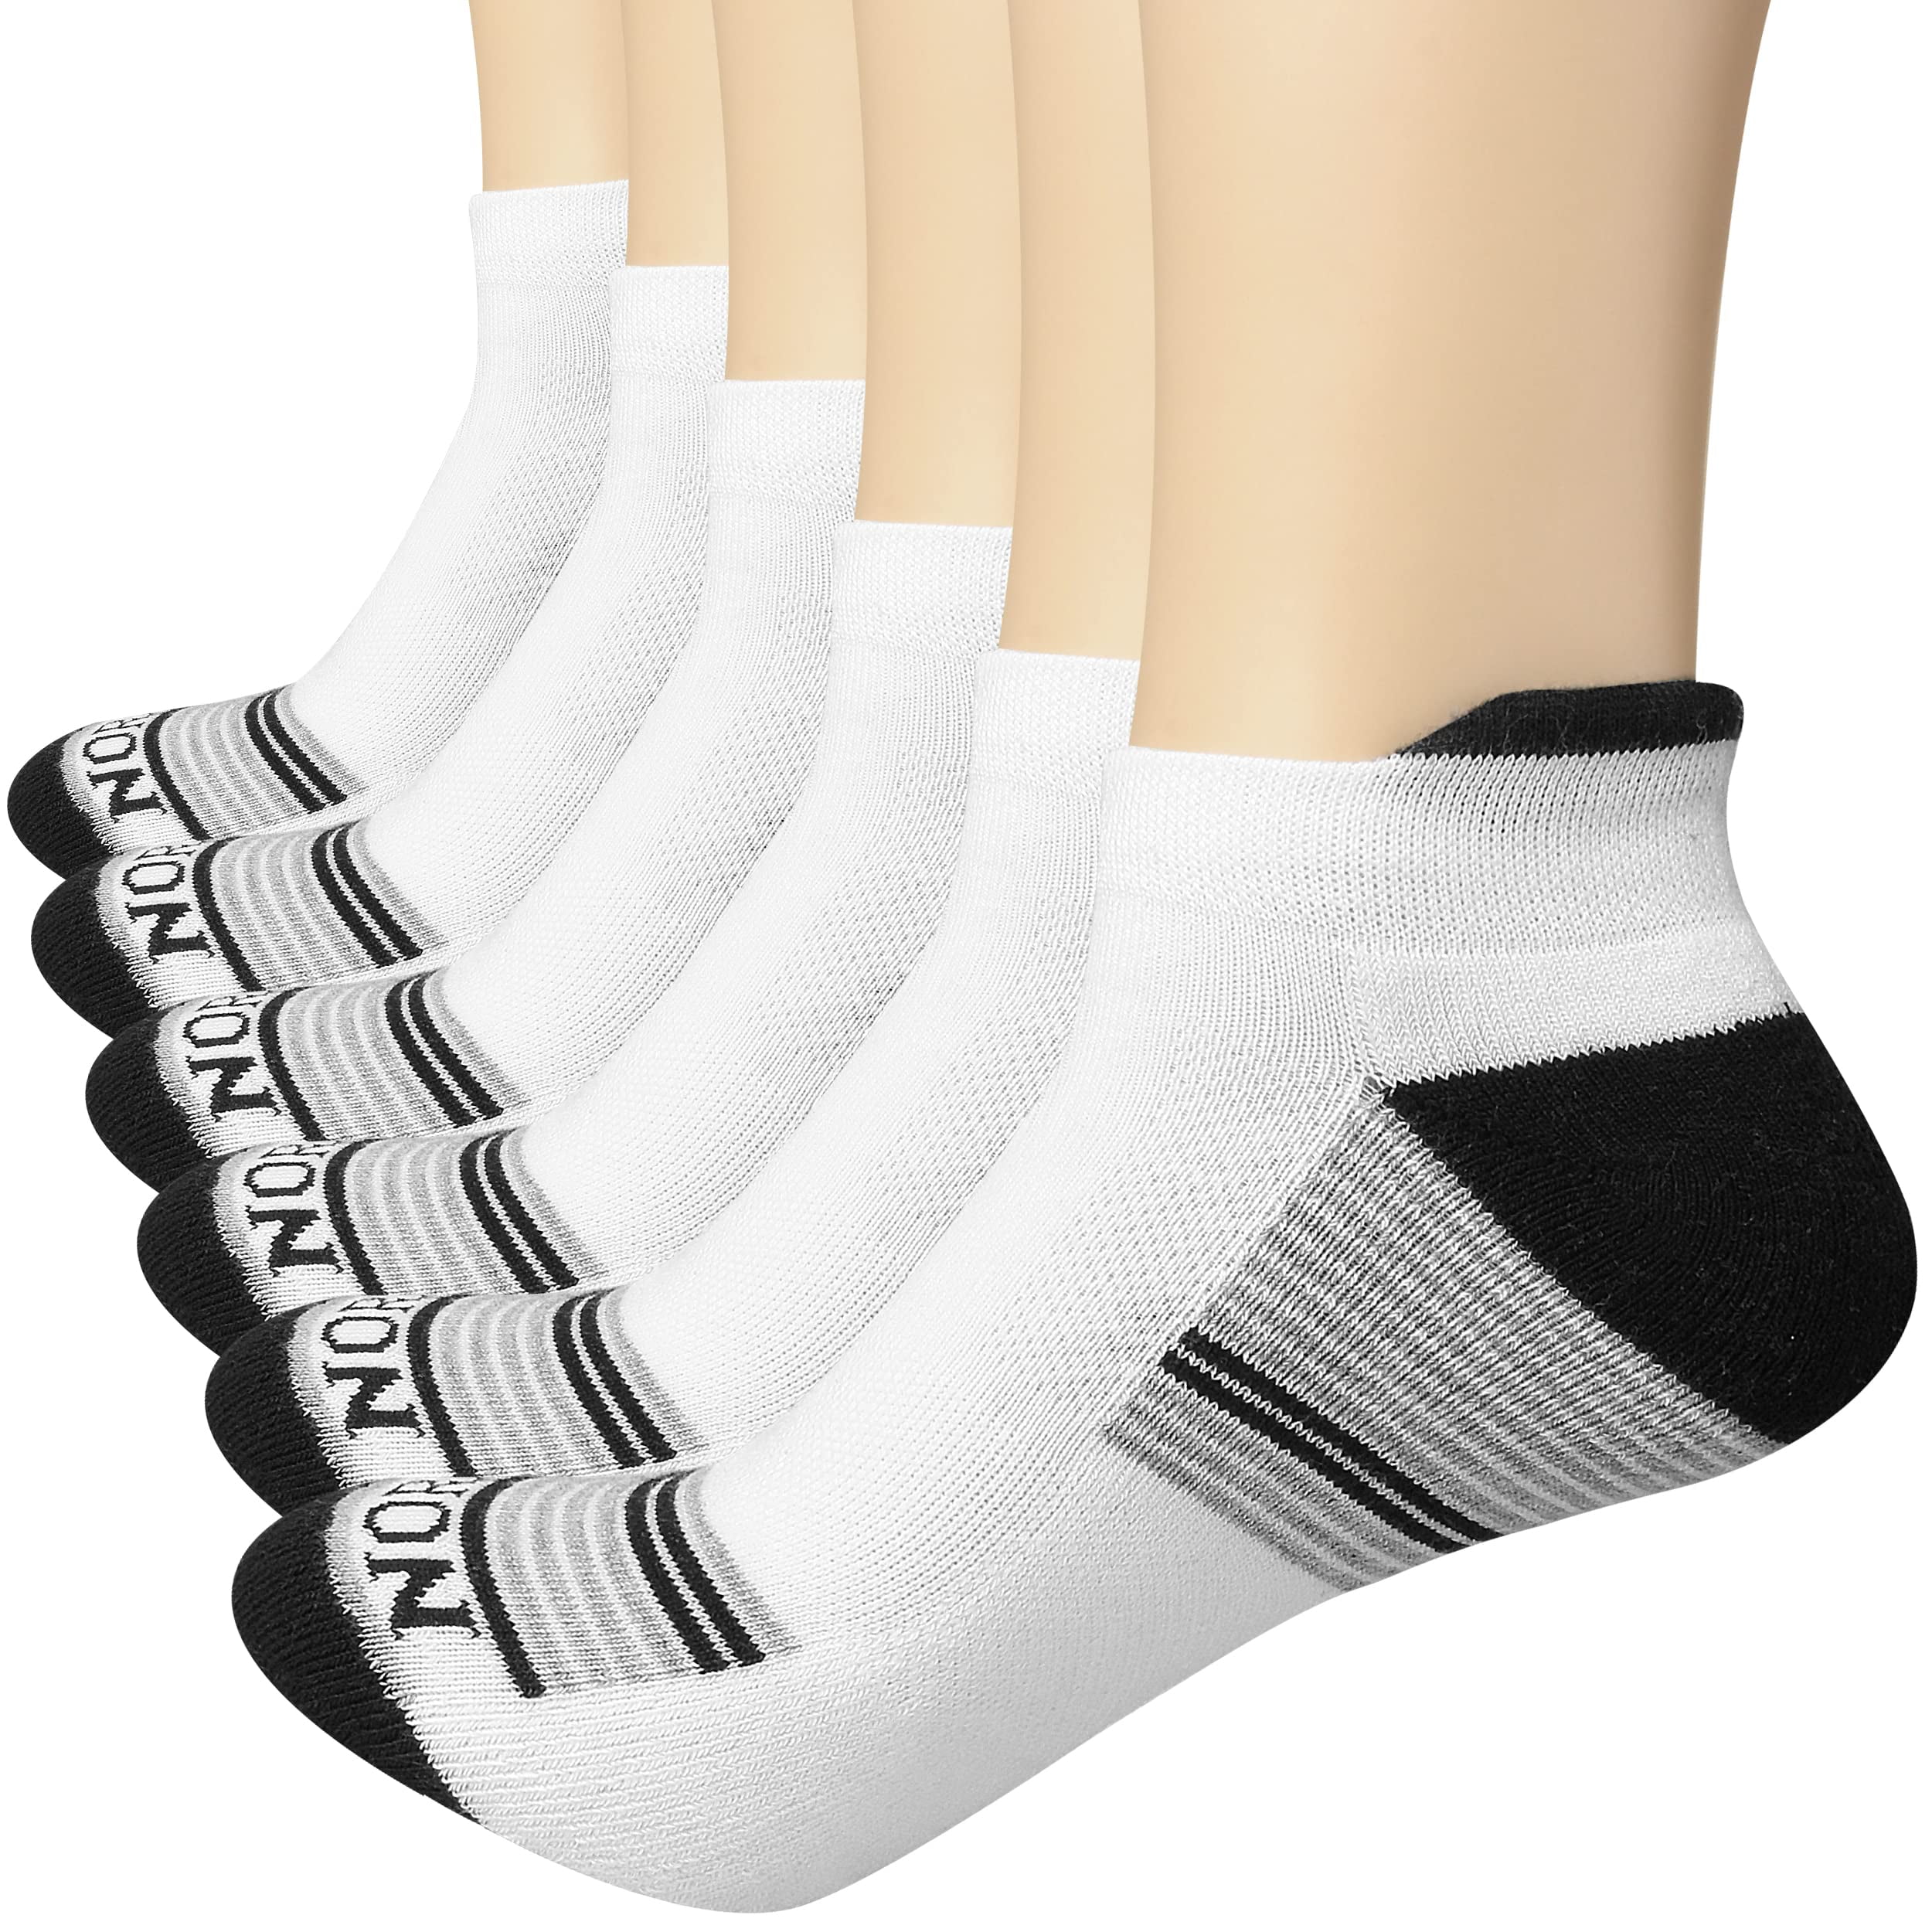 Nortag 6 Pairs Performance Socks for Women – Low Cut Running Socks with ...